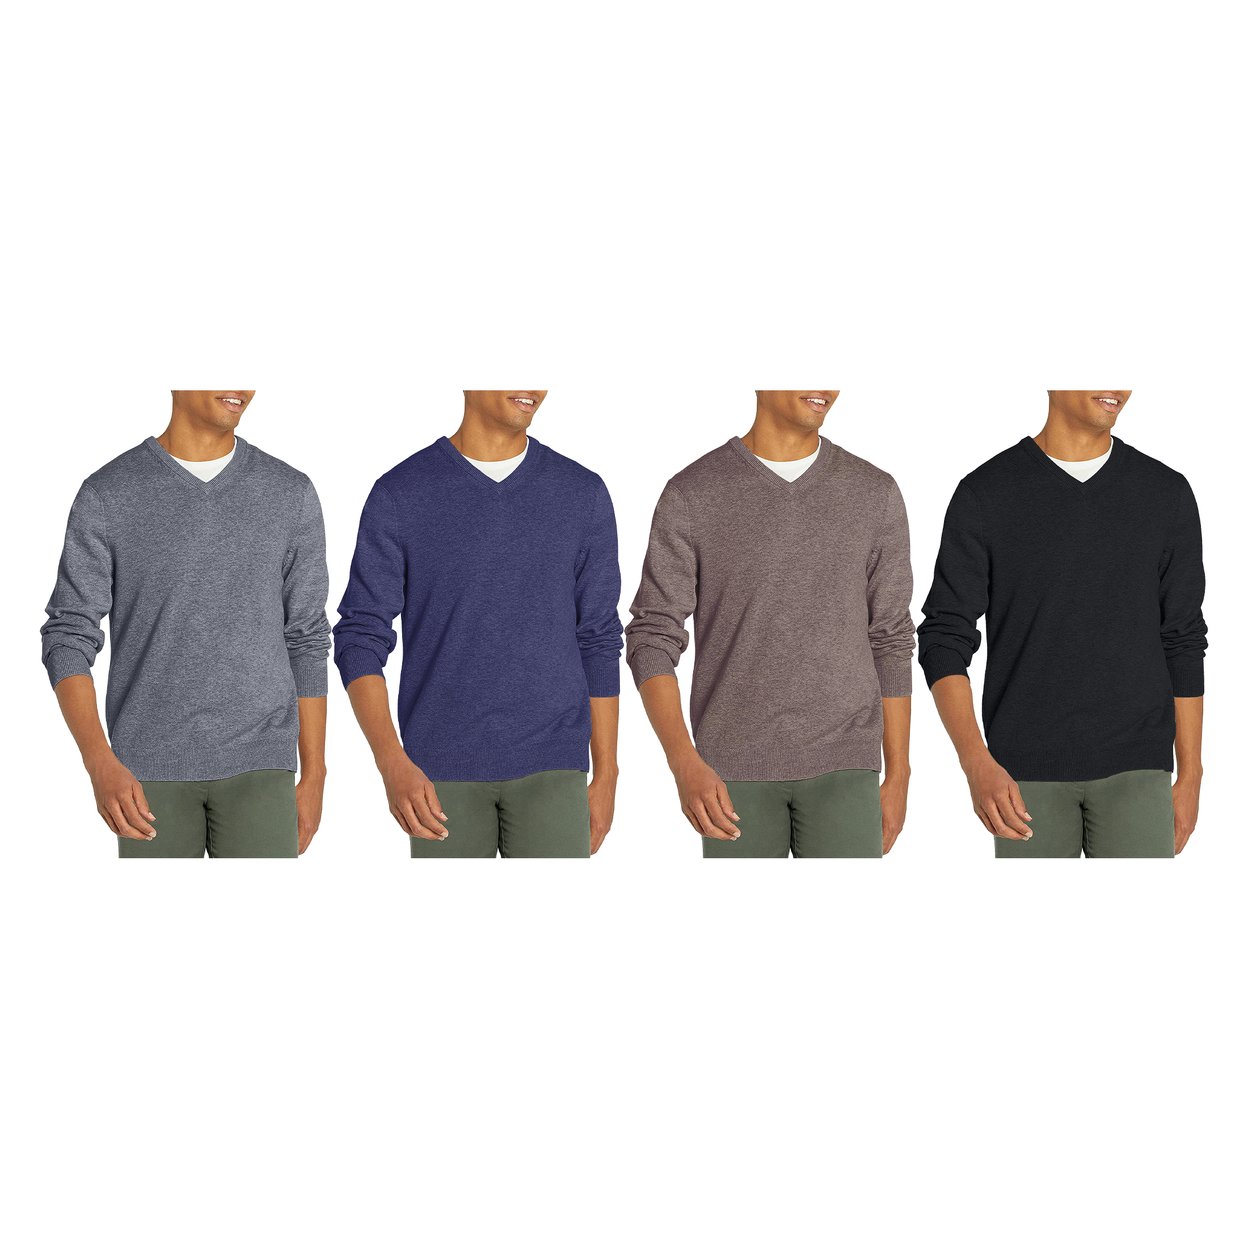 Multi-Pack: Men's Casual Ultra Soft Slim Fit Warm Knit V-Neck Sweater - 1-pack, Small